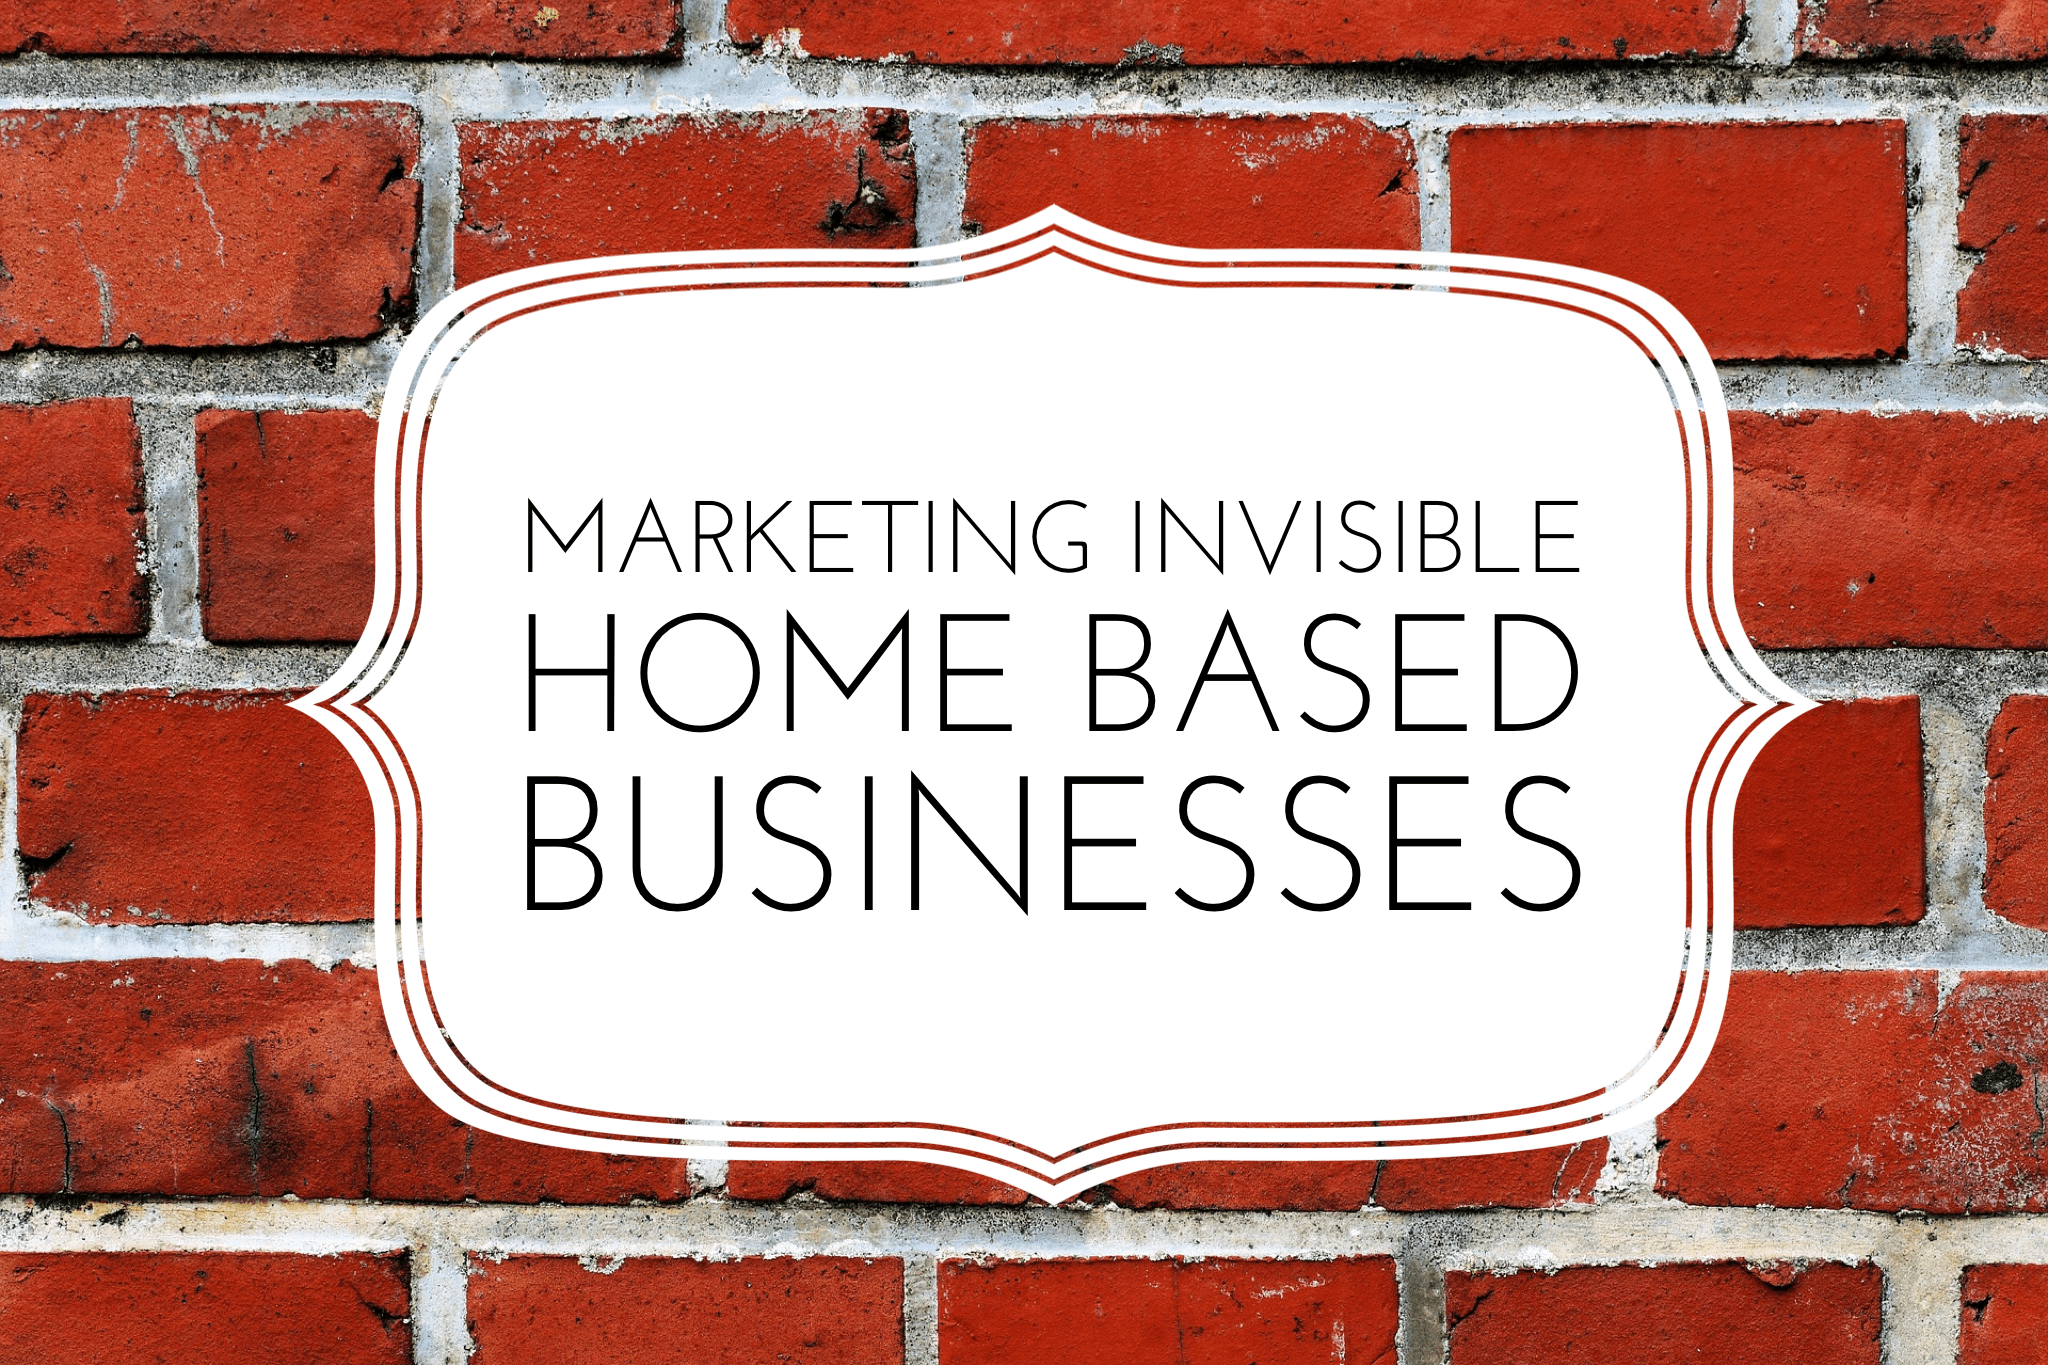 Marketing Invisible Home Based Businesses